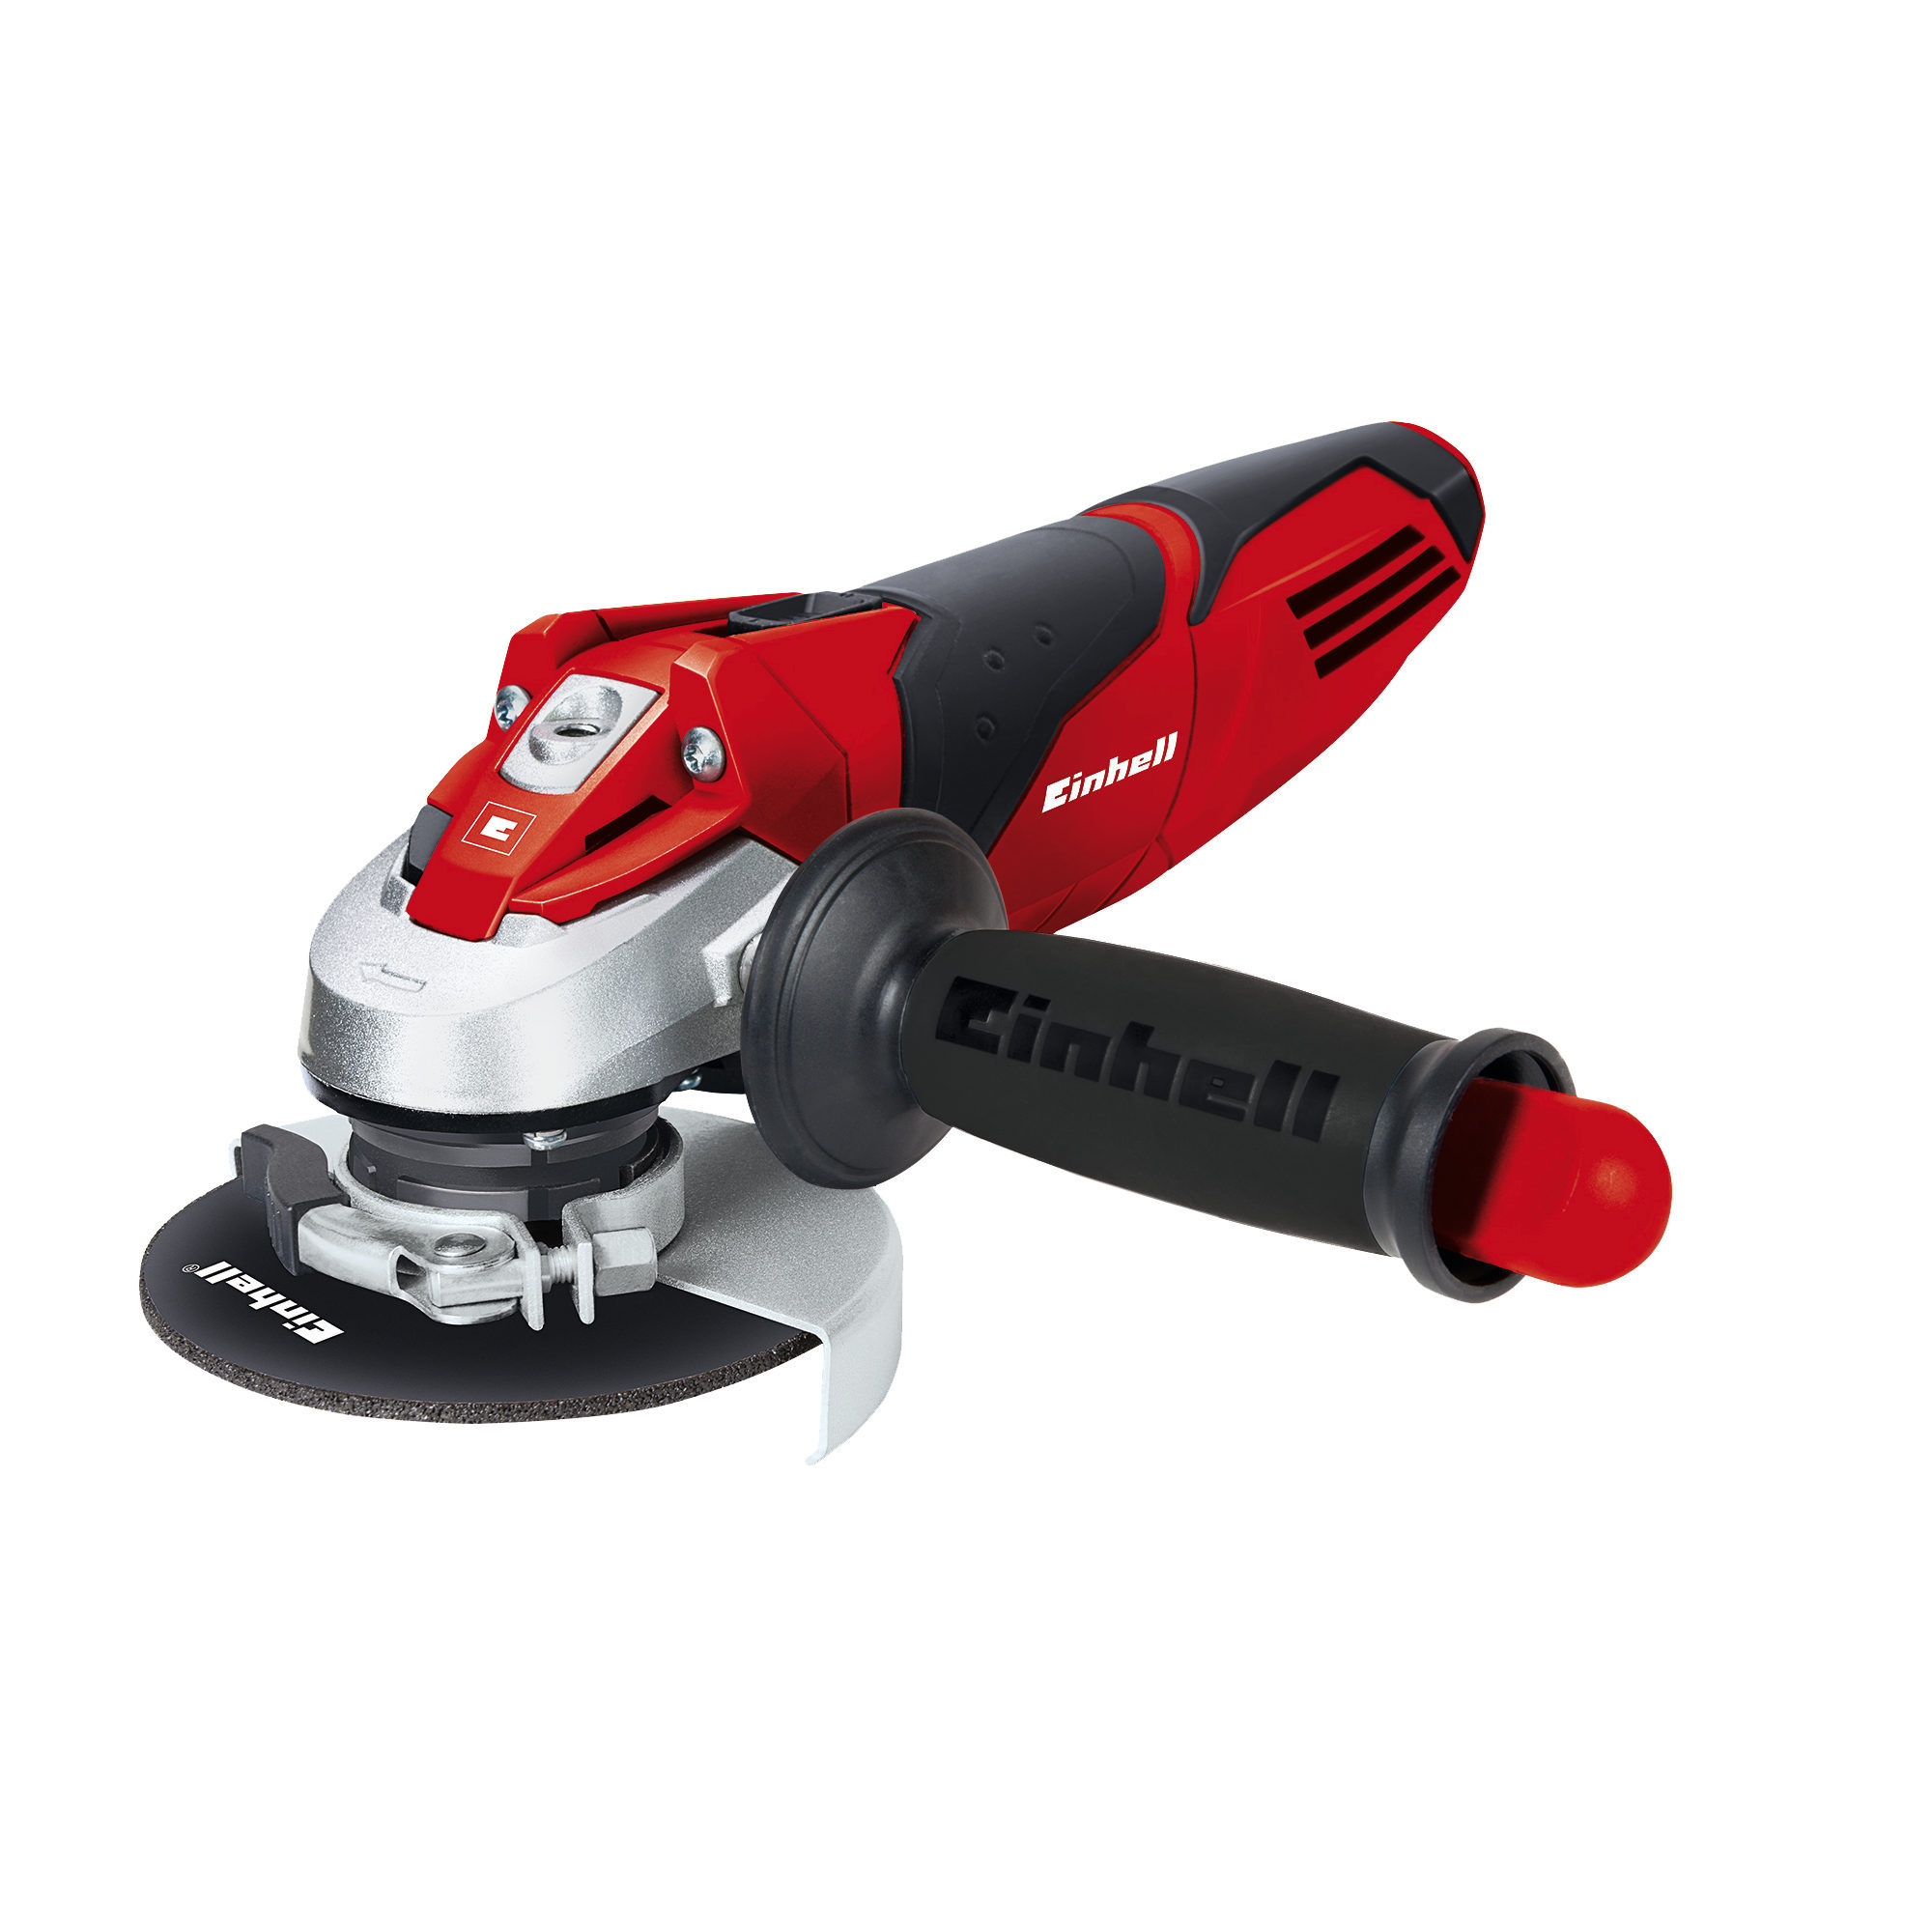 EINHELL - Angle Grinder 115mm 720W - TE-AG 115